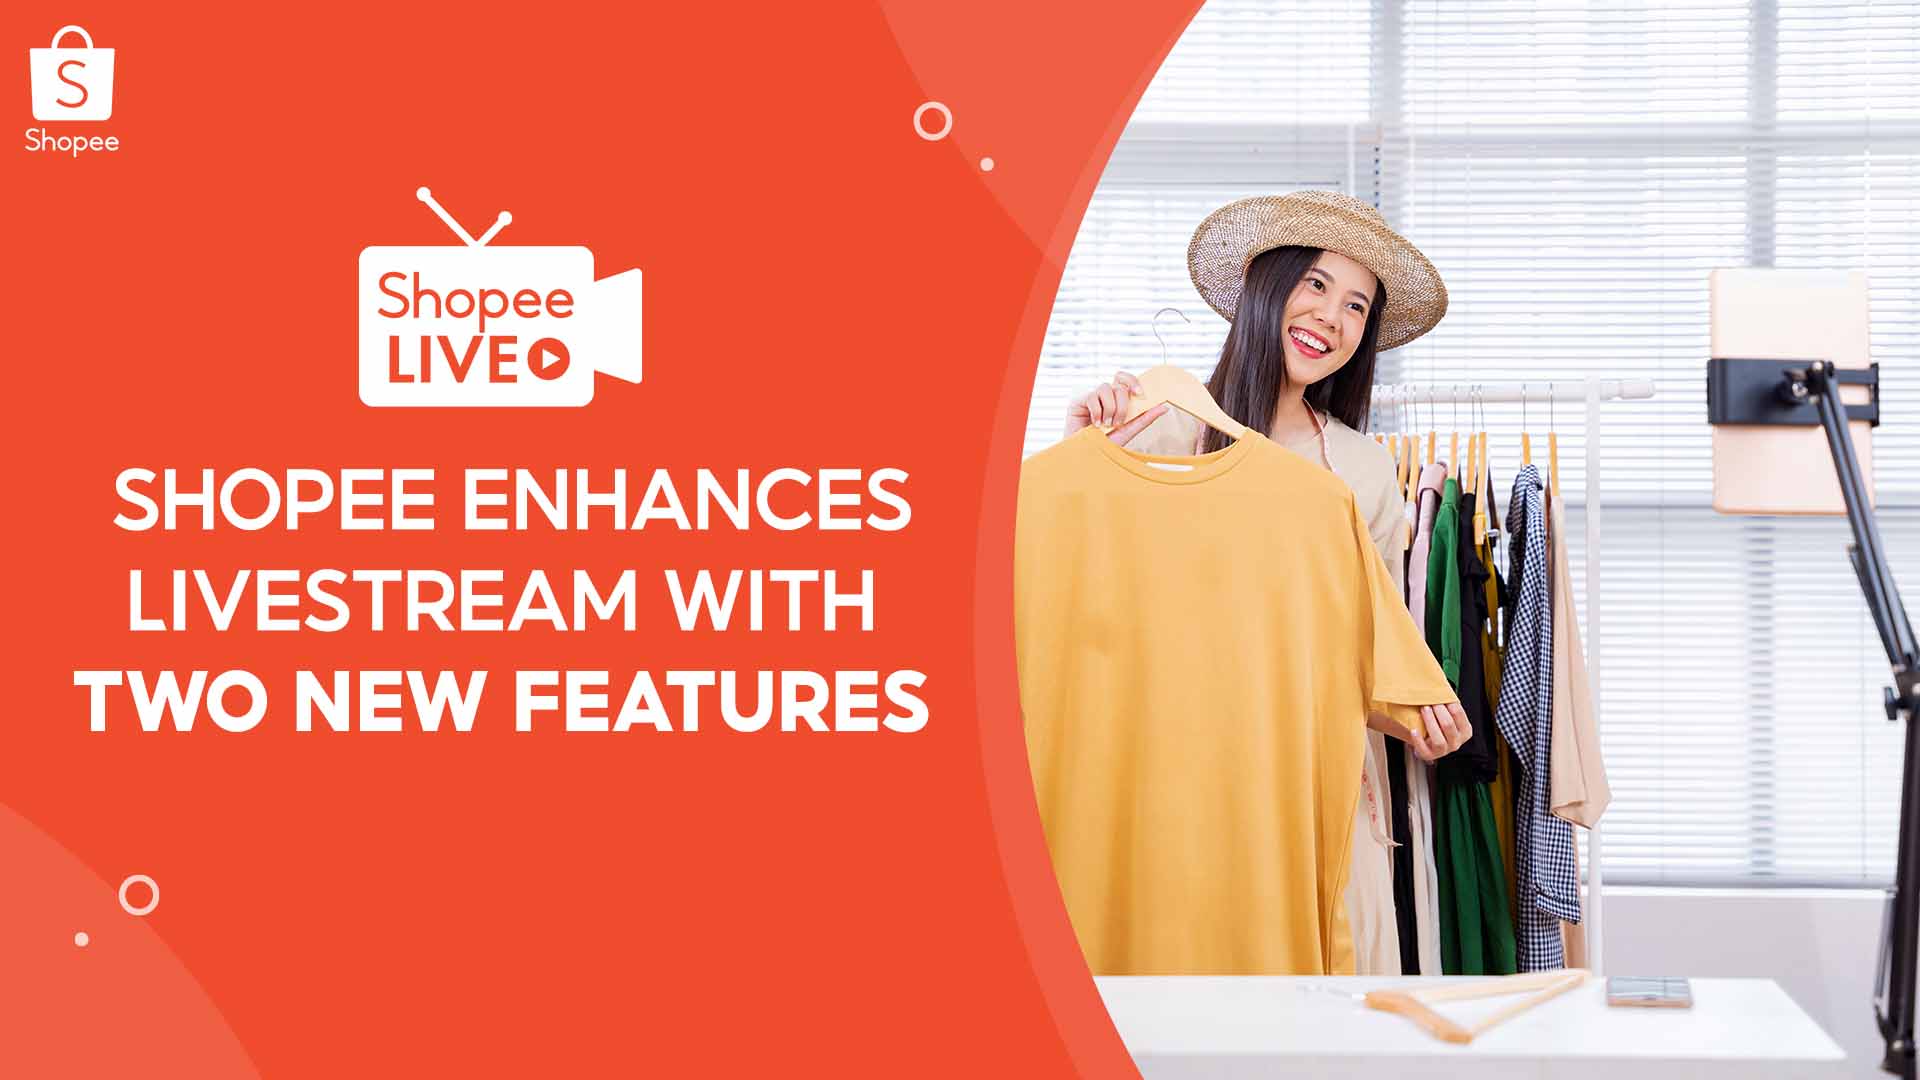 Shopee Rolls Out New Features on Shopee Live to Help Sellers Boost Views and Increase Sales in time for the 8.8 Mega Flash Sale